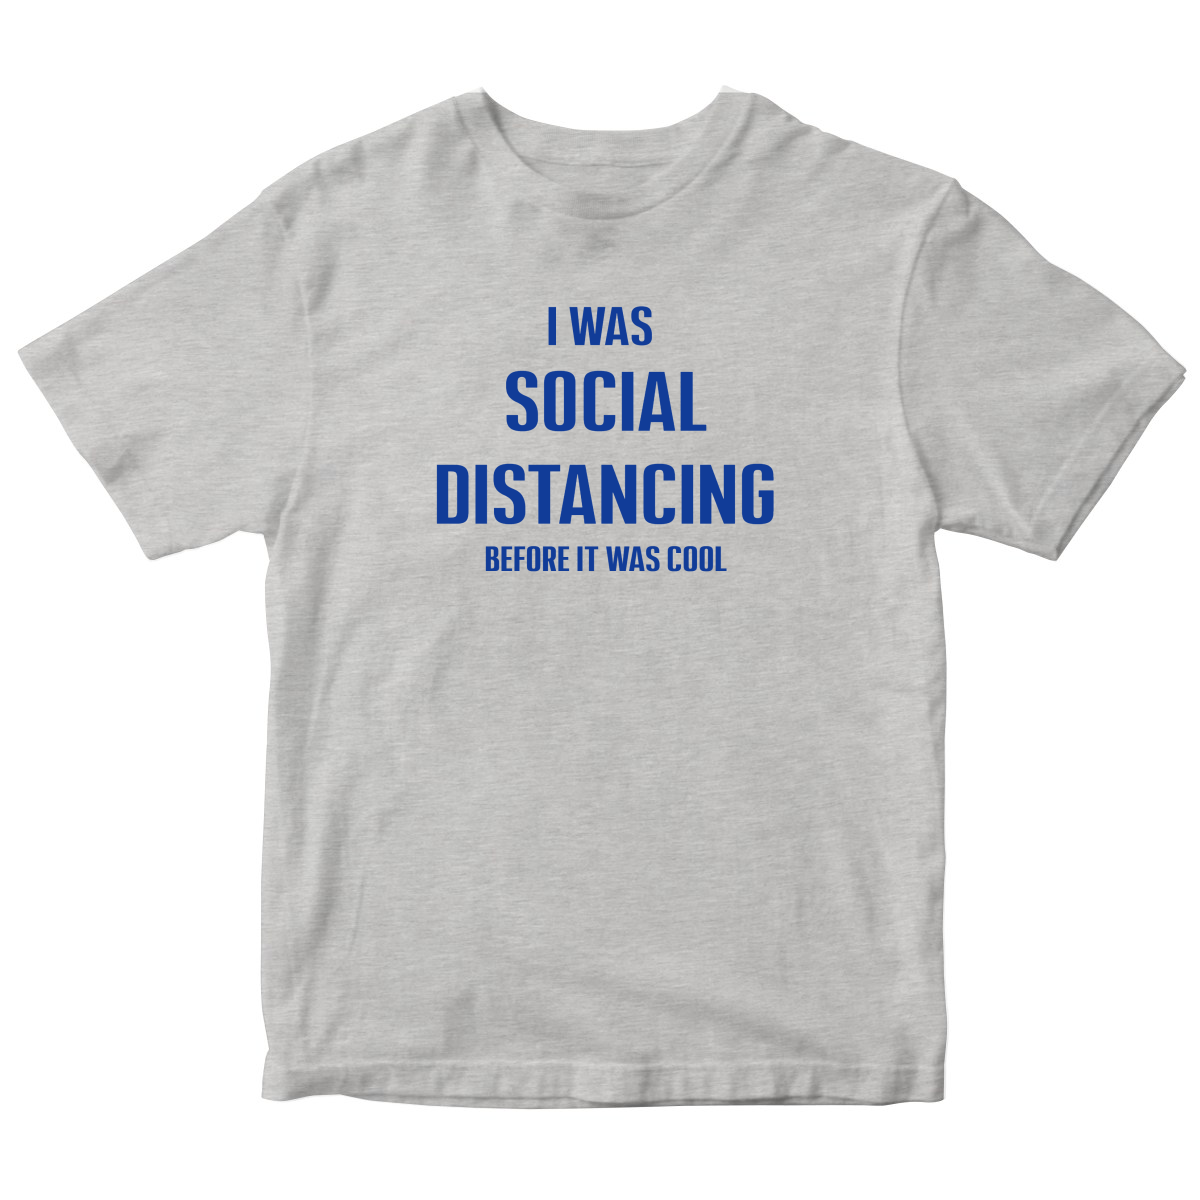 I was social distancing before it was cool Kids T-shirt | Gray